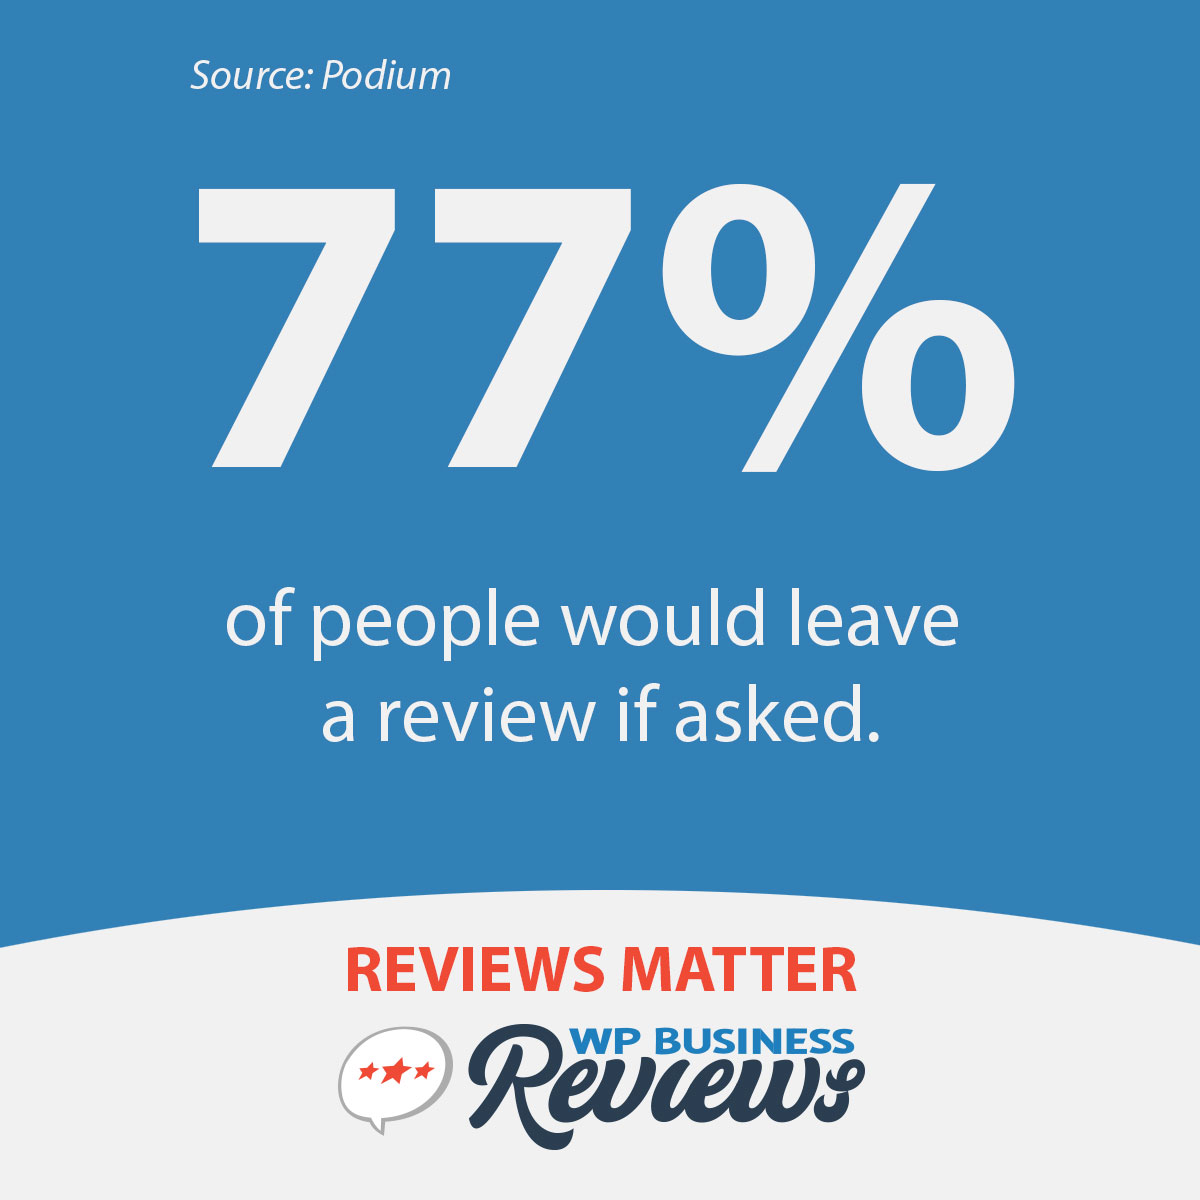 According to Podium, 77% of people would leave a review if asked.